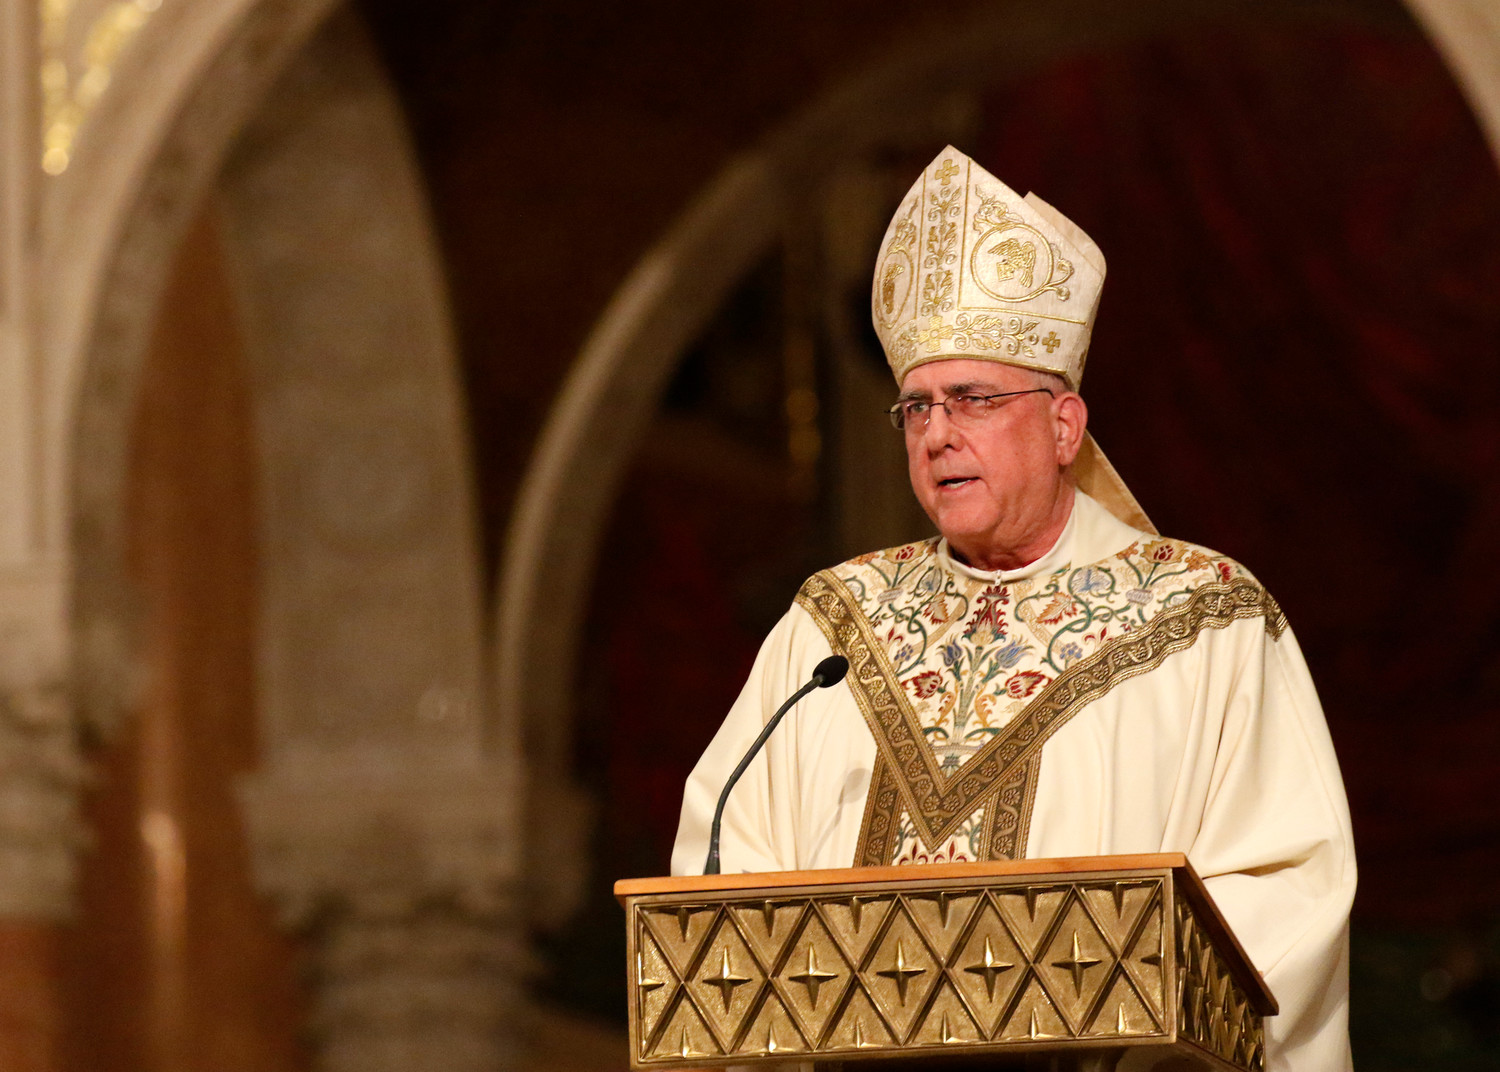 Archbishop Joseph F. Naumann of Kansas City, Kan., chairman of the U.S. bishops’ Committee on Pro-Life Activities, delivers his homily during the opening Mass of the National Prayer Vigil for Life Jan. 17 at the Basilica of the National Shrine of the Immaculate Conception in Washington.